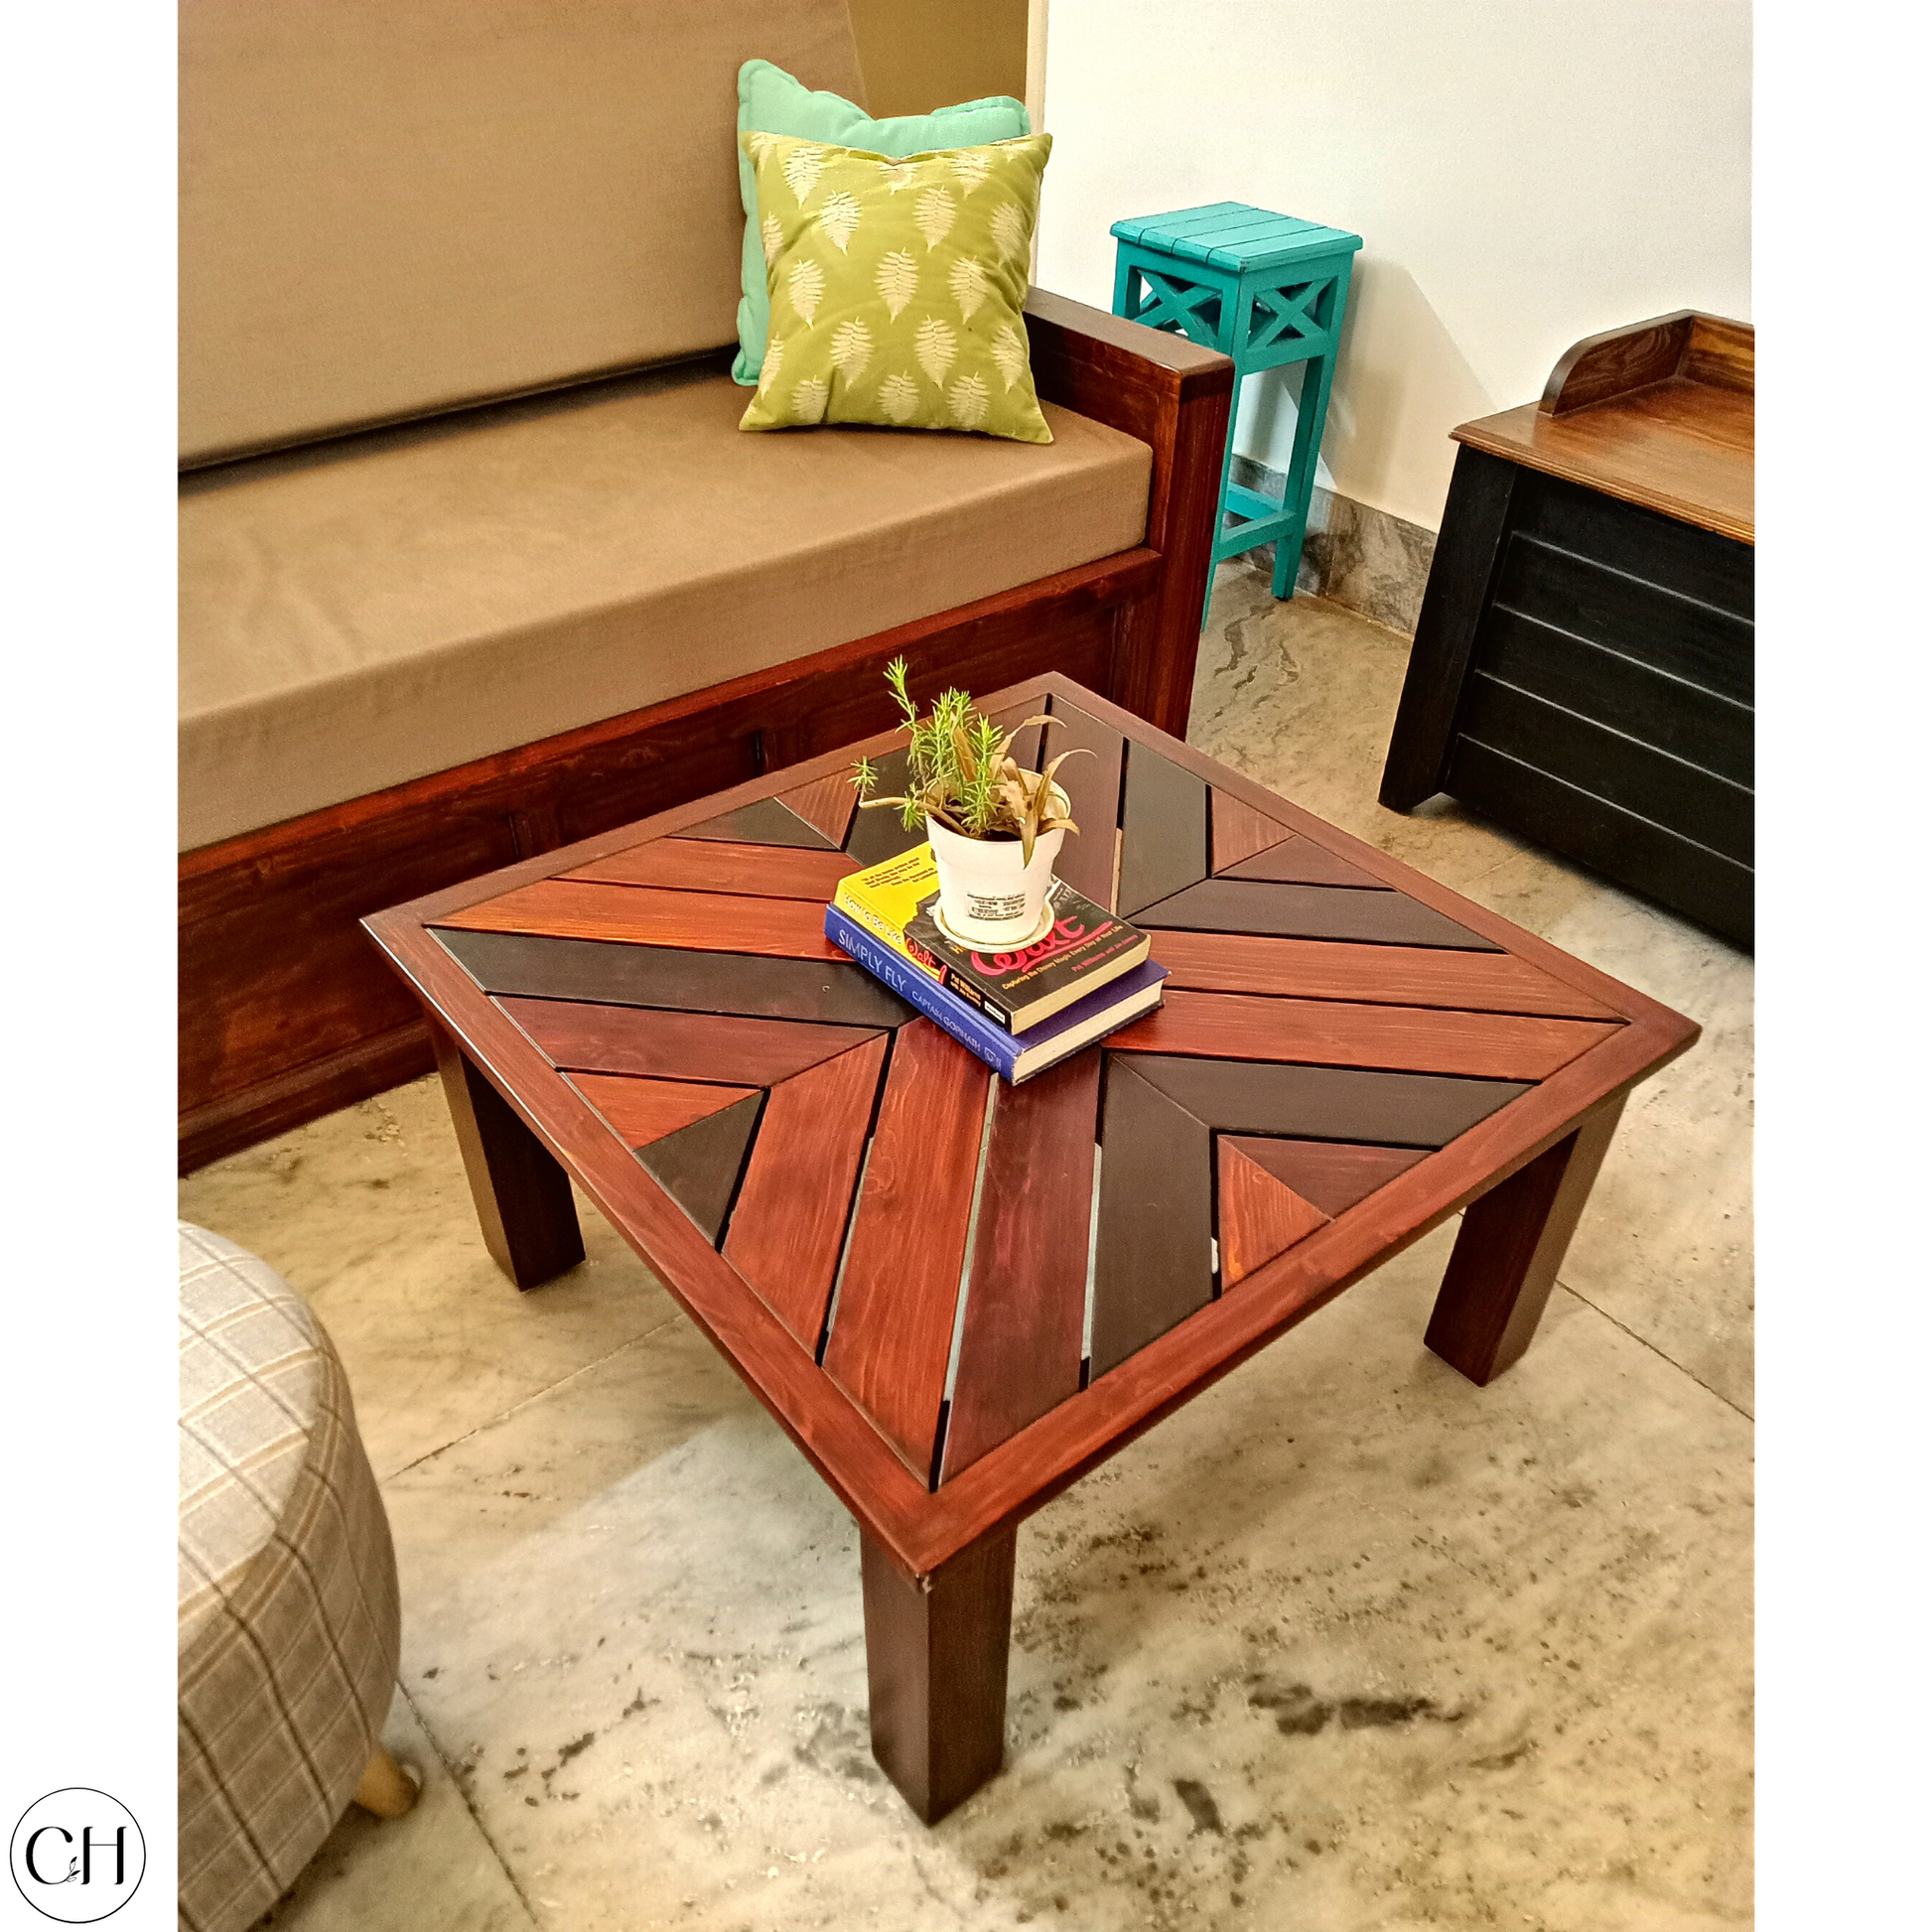 CustHum Corfu - Wooden Centre Table with Herrinbone Top (showing small planter on top of two books, in a living room setting)